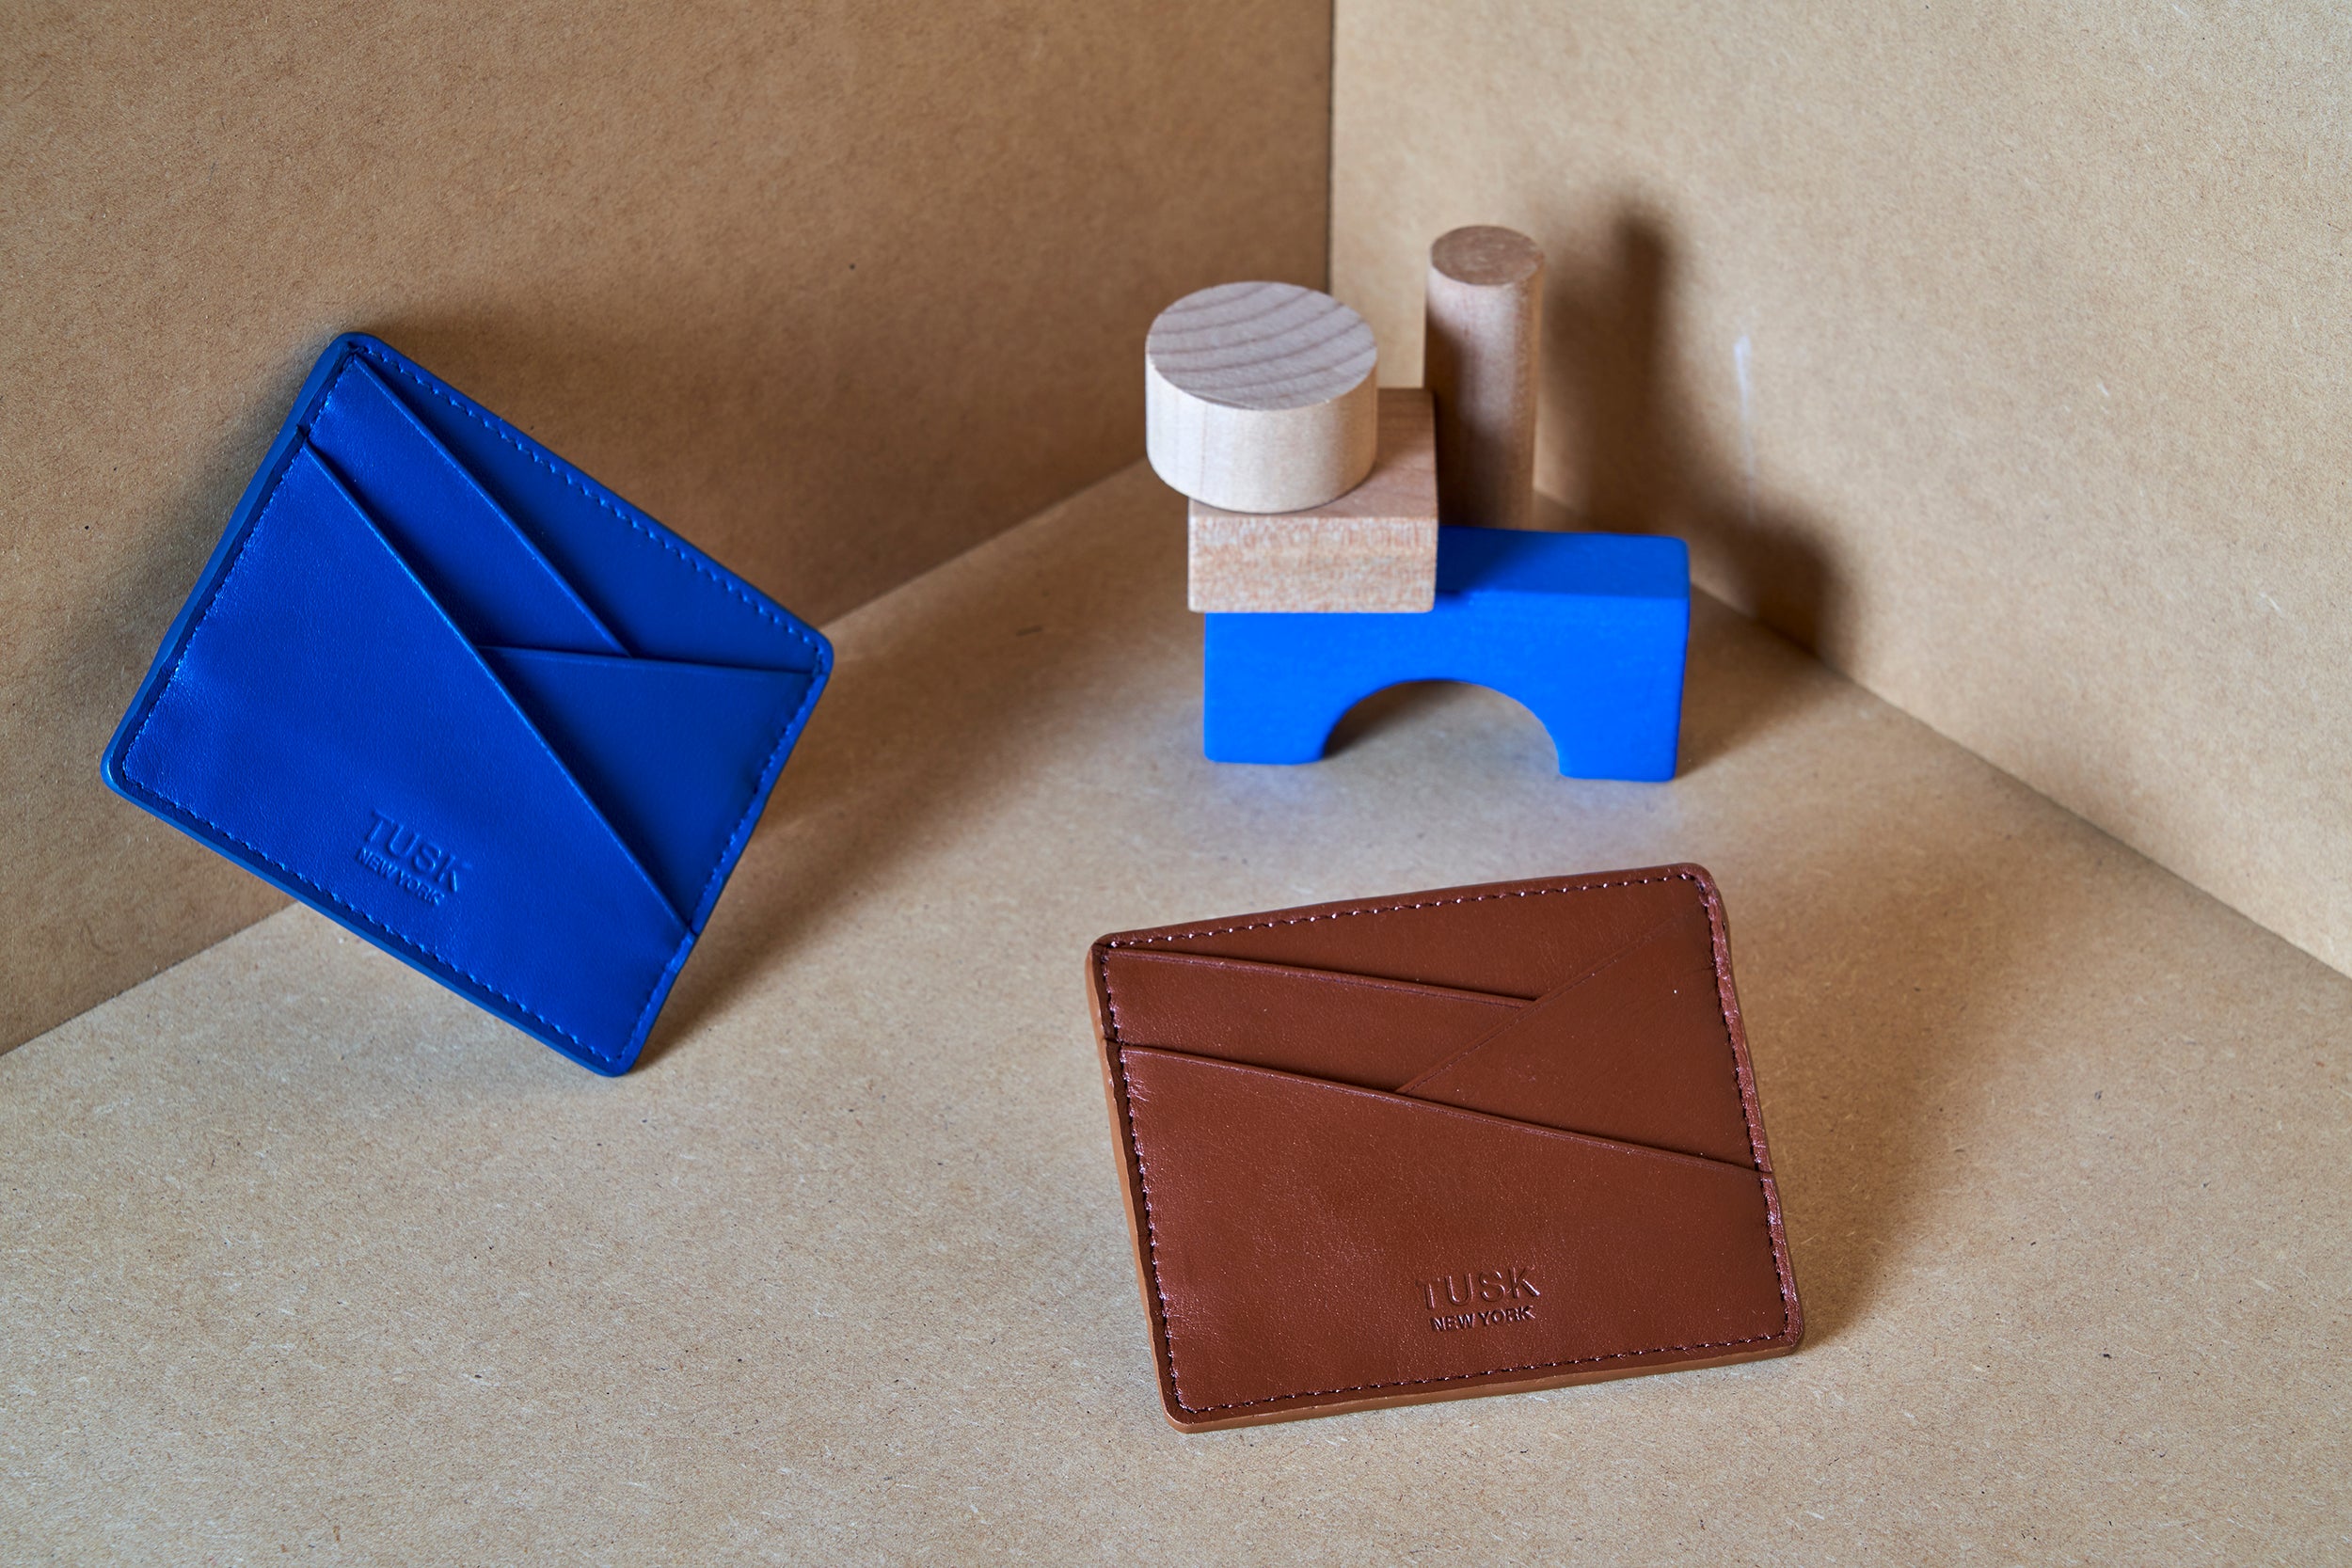 Blue and brown leather wallets displayed with wooden blocks on a craft paper background